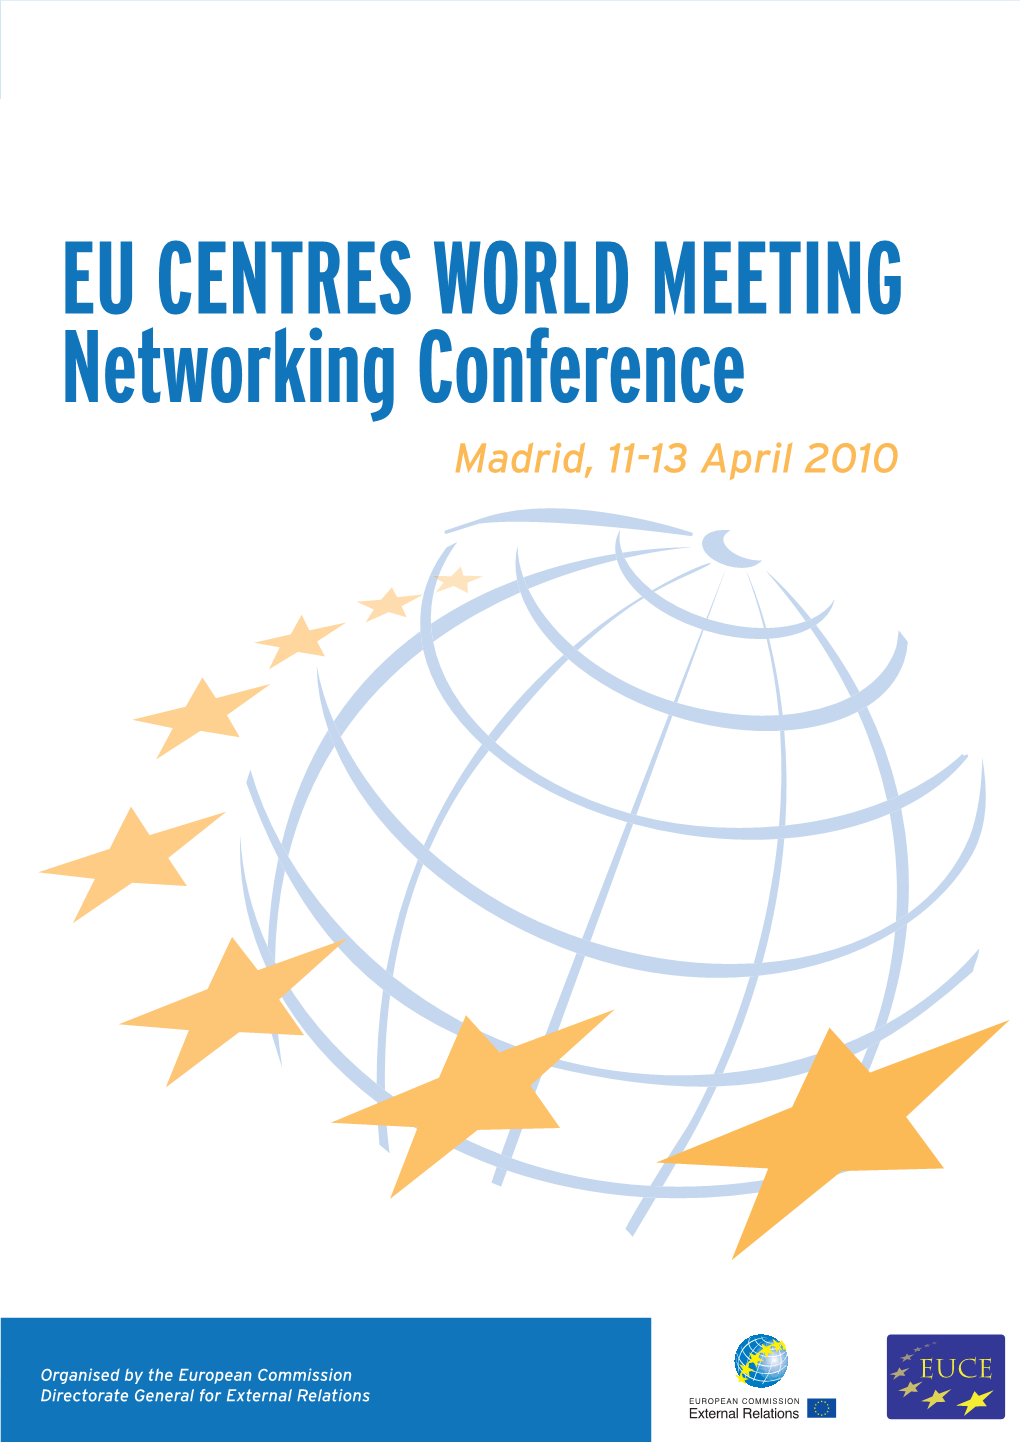 EU CENTRES WORLD MEETING Networking Conference EU CENTRES Madrid,WORLD 11-13 April 2010 MEETING Networking Conference Madrid, 11-13 April 2010